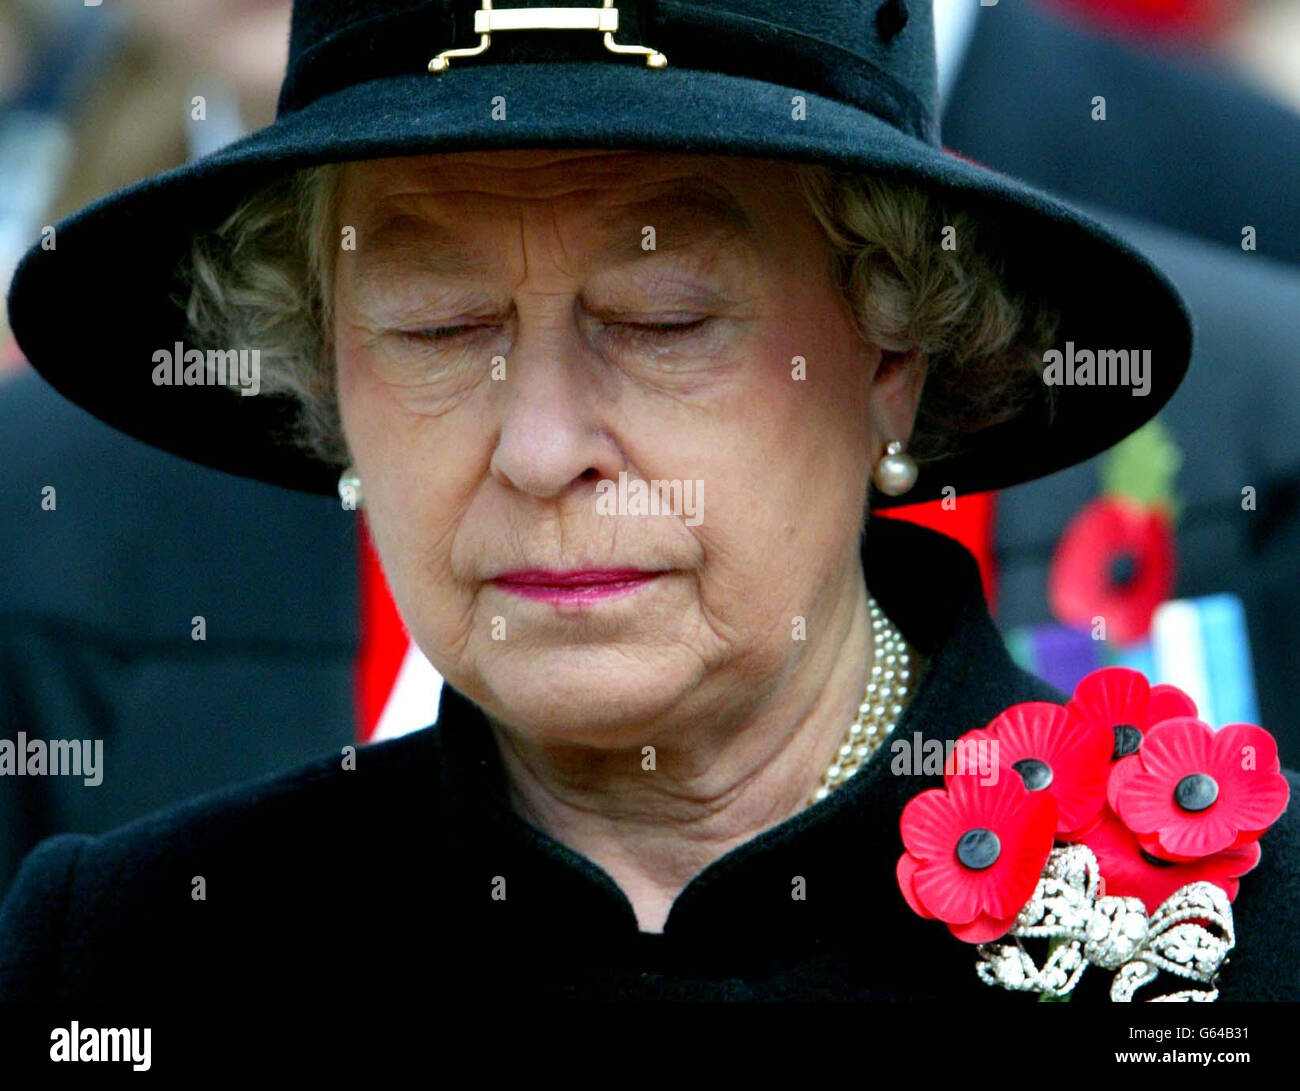 Queen Elizabeth II sheds a tear during the Field of Remembrance Service at Westminster Abbey, London. The Queen opened the ceremony - the annual open air service in St Margaret's churchyard, held in memory of Britain's war heroes. * ... - by laying down a small wooden cross bearing a scarlet poppy in the field. Stock Photo